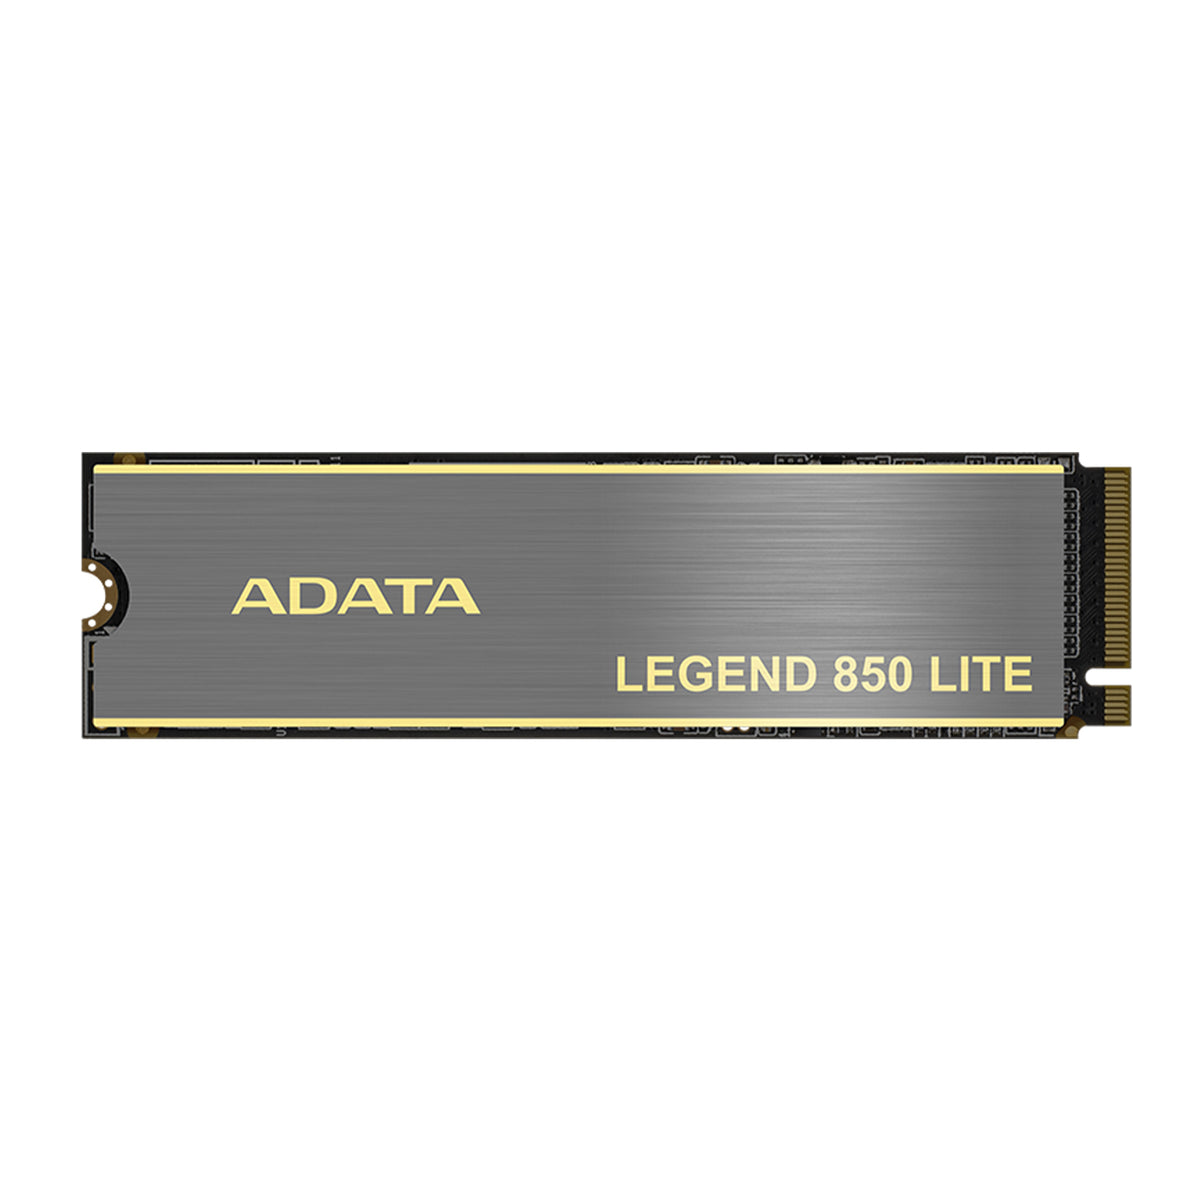 ADATA 1TB SSD Legend 850 LITE, NVMe PCIe Gen4 x 4 M.2 2280 Internal Solid State Drive, Speed up to 5,000MB/s, Storage for PS5 and PC, High Endurance with 3D NAND